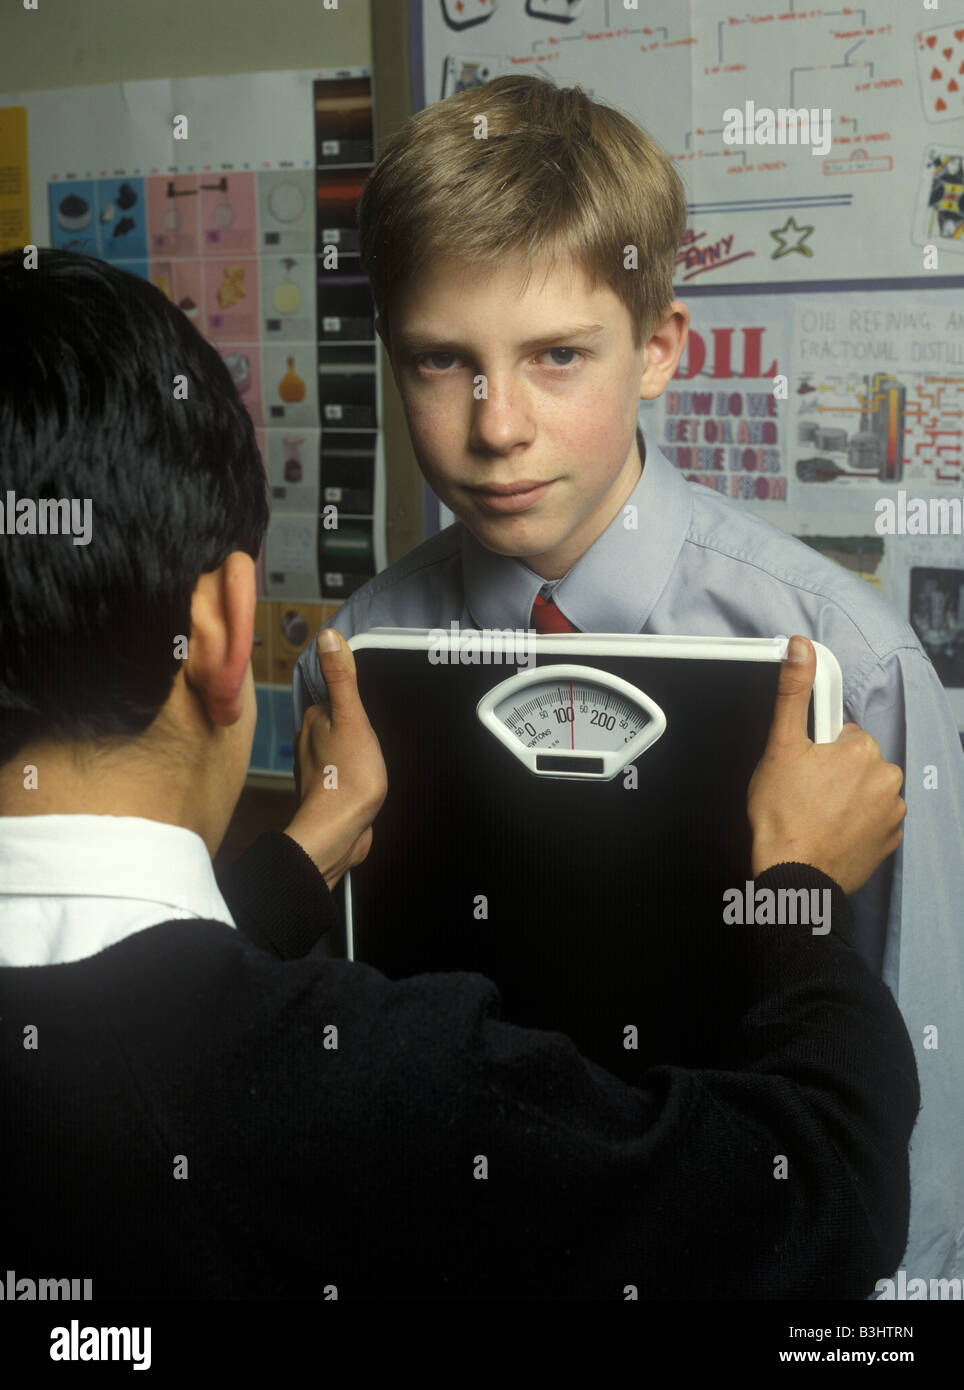 Two schoolboys measure the force of pushing using bathroom scales calibrated in Newtons Stock Photo